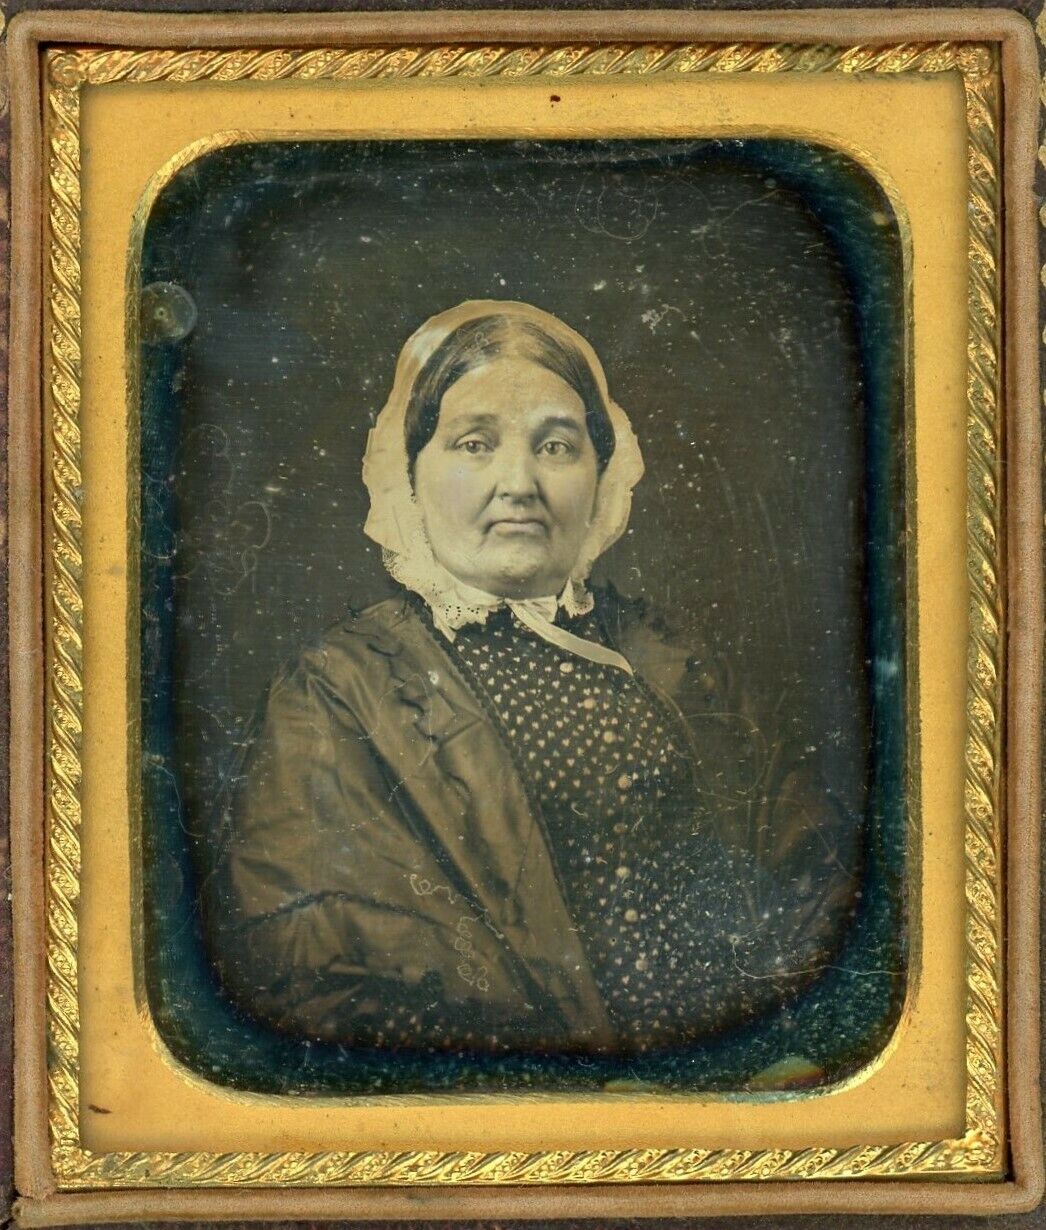 Woman Wearing Day Cap With Frown (1/6 Plate Daguerreotype)